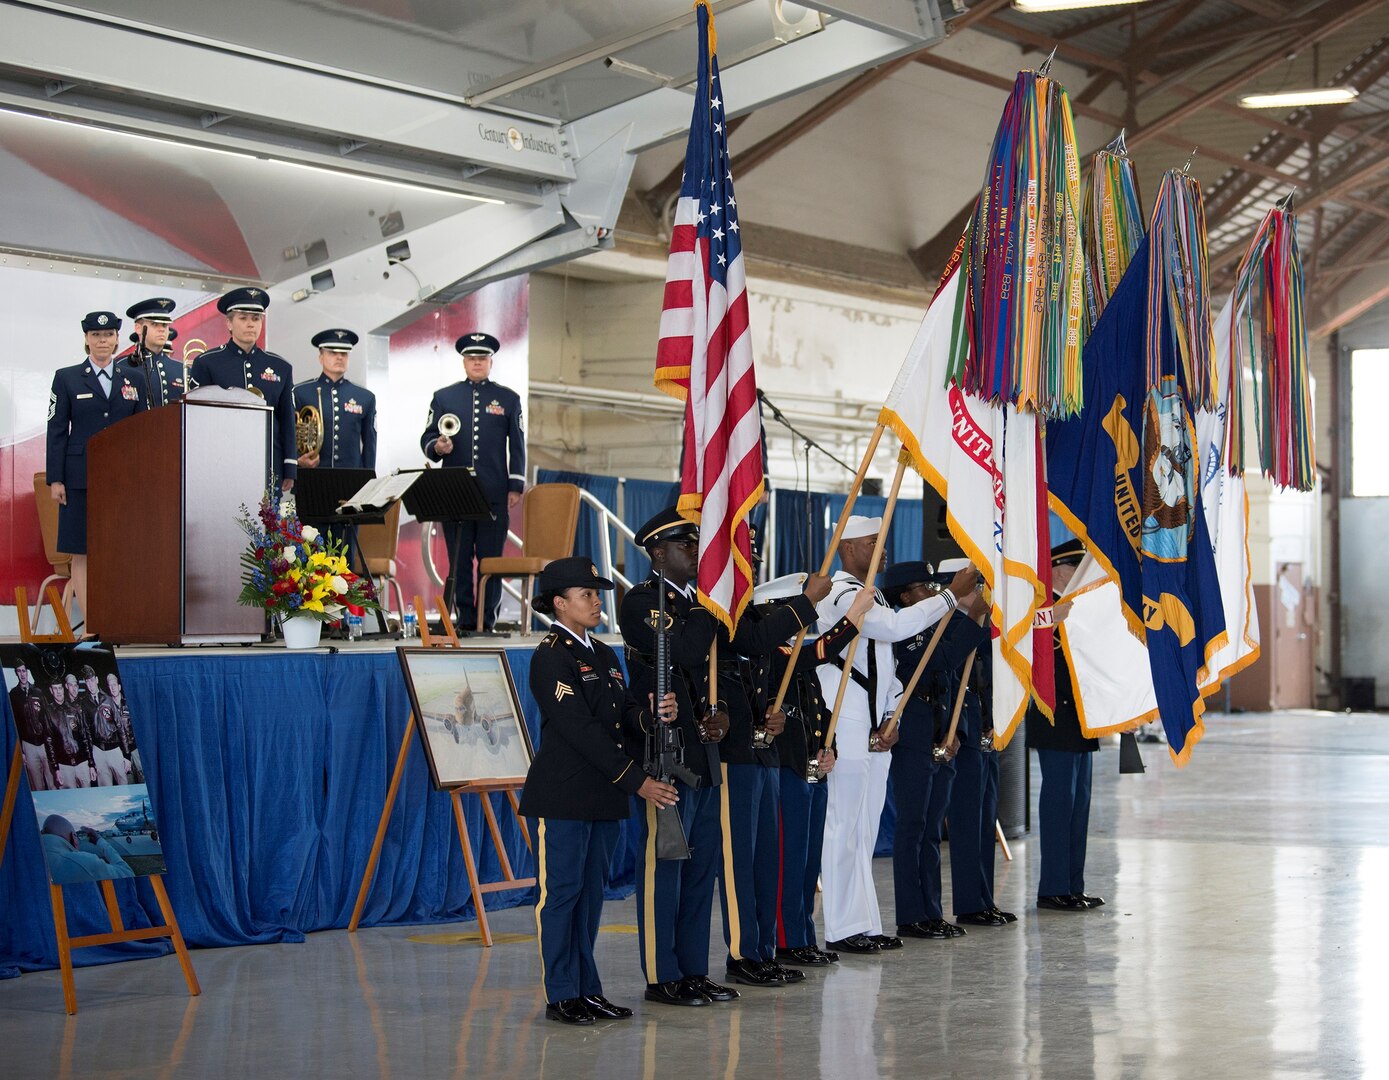 A joint service color guard prepare to present the colors during a memorial service for retired U.S. Air Force Lt. Col. Richard “Dick” E. Cole at Joint Base San Antonio-Randolph April 18. Cole, the last surviving Doolittle Raider, was among 80 Airmen who took part in the storied World War II Doolittle Tokyo Raid and was a founding Airman of the USAF Special Operations community.